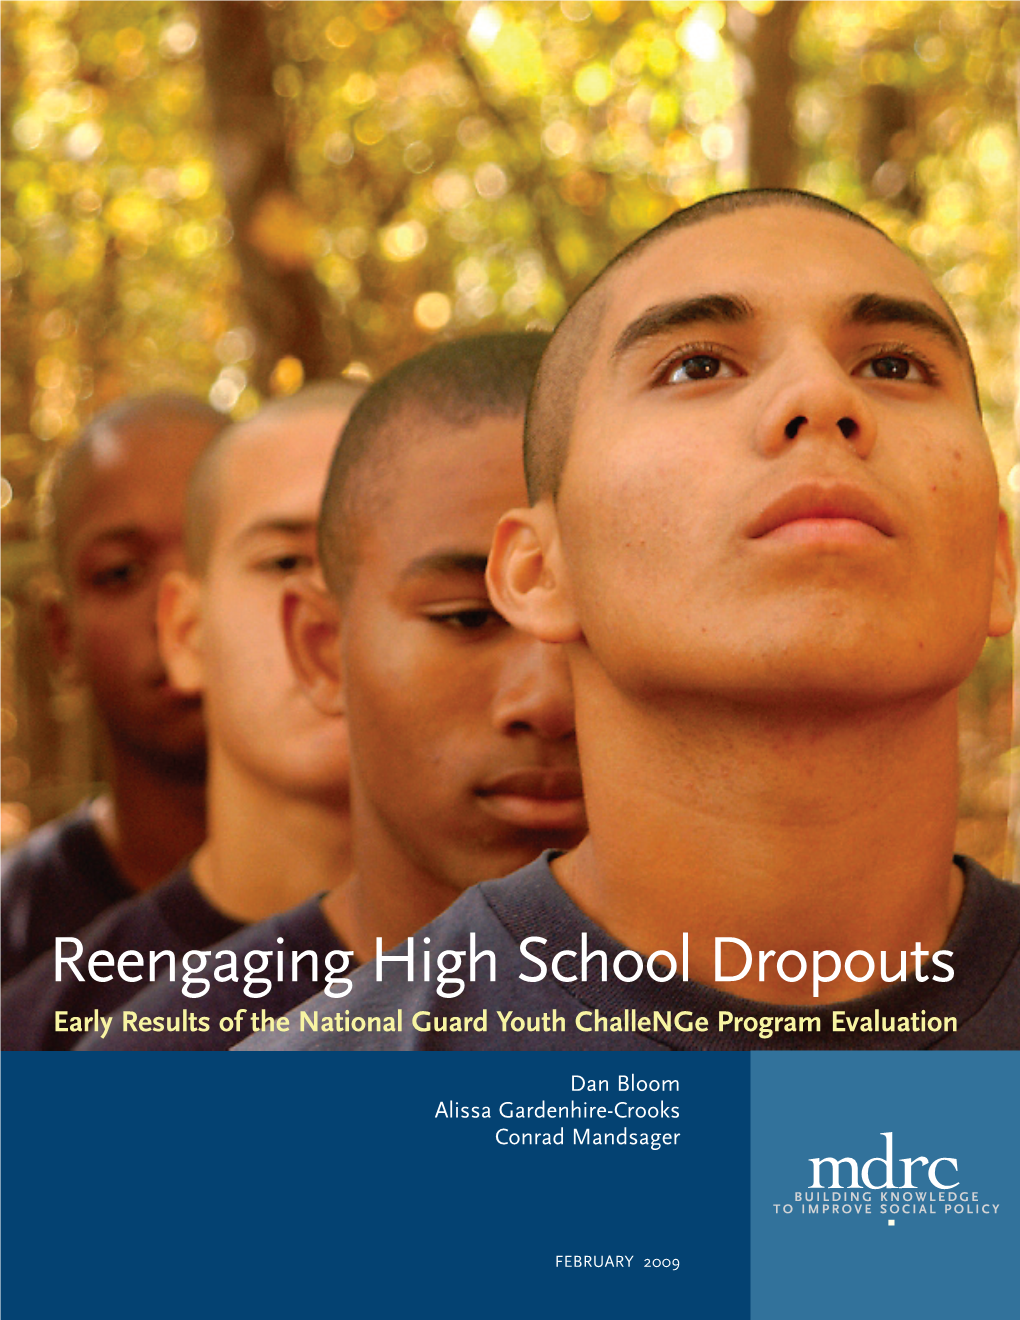 Reengaging High School Dropouts Early Results of the National Guard Youth Challenge Program Evaluation